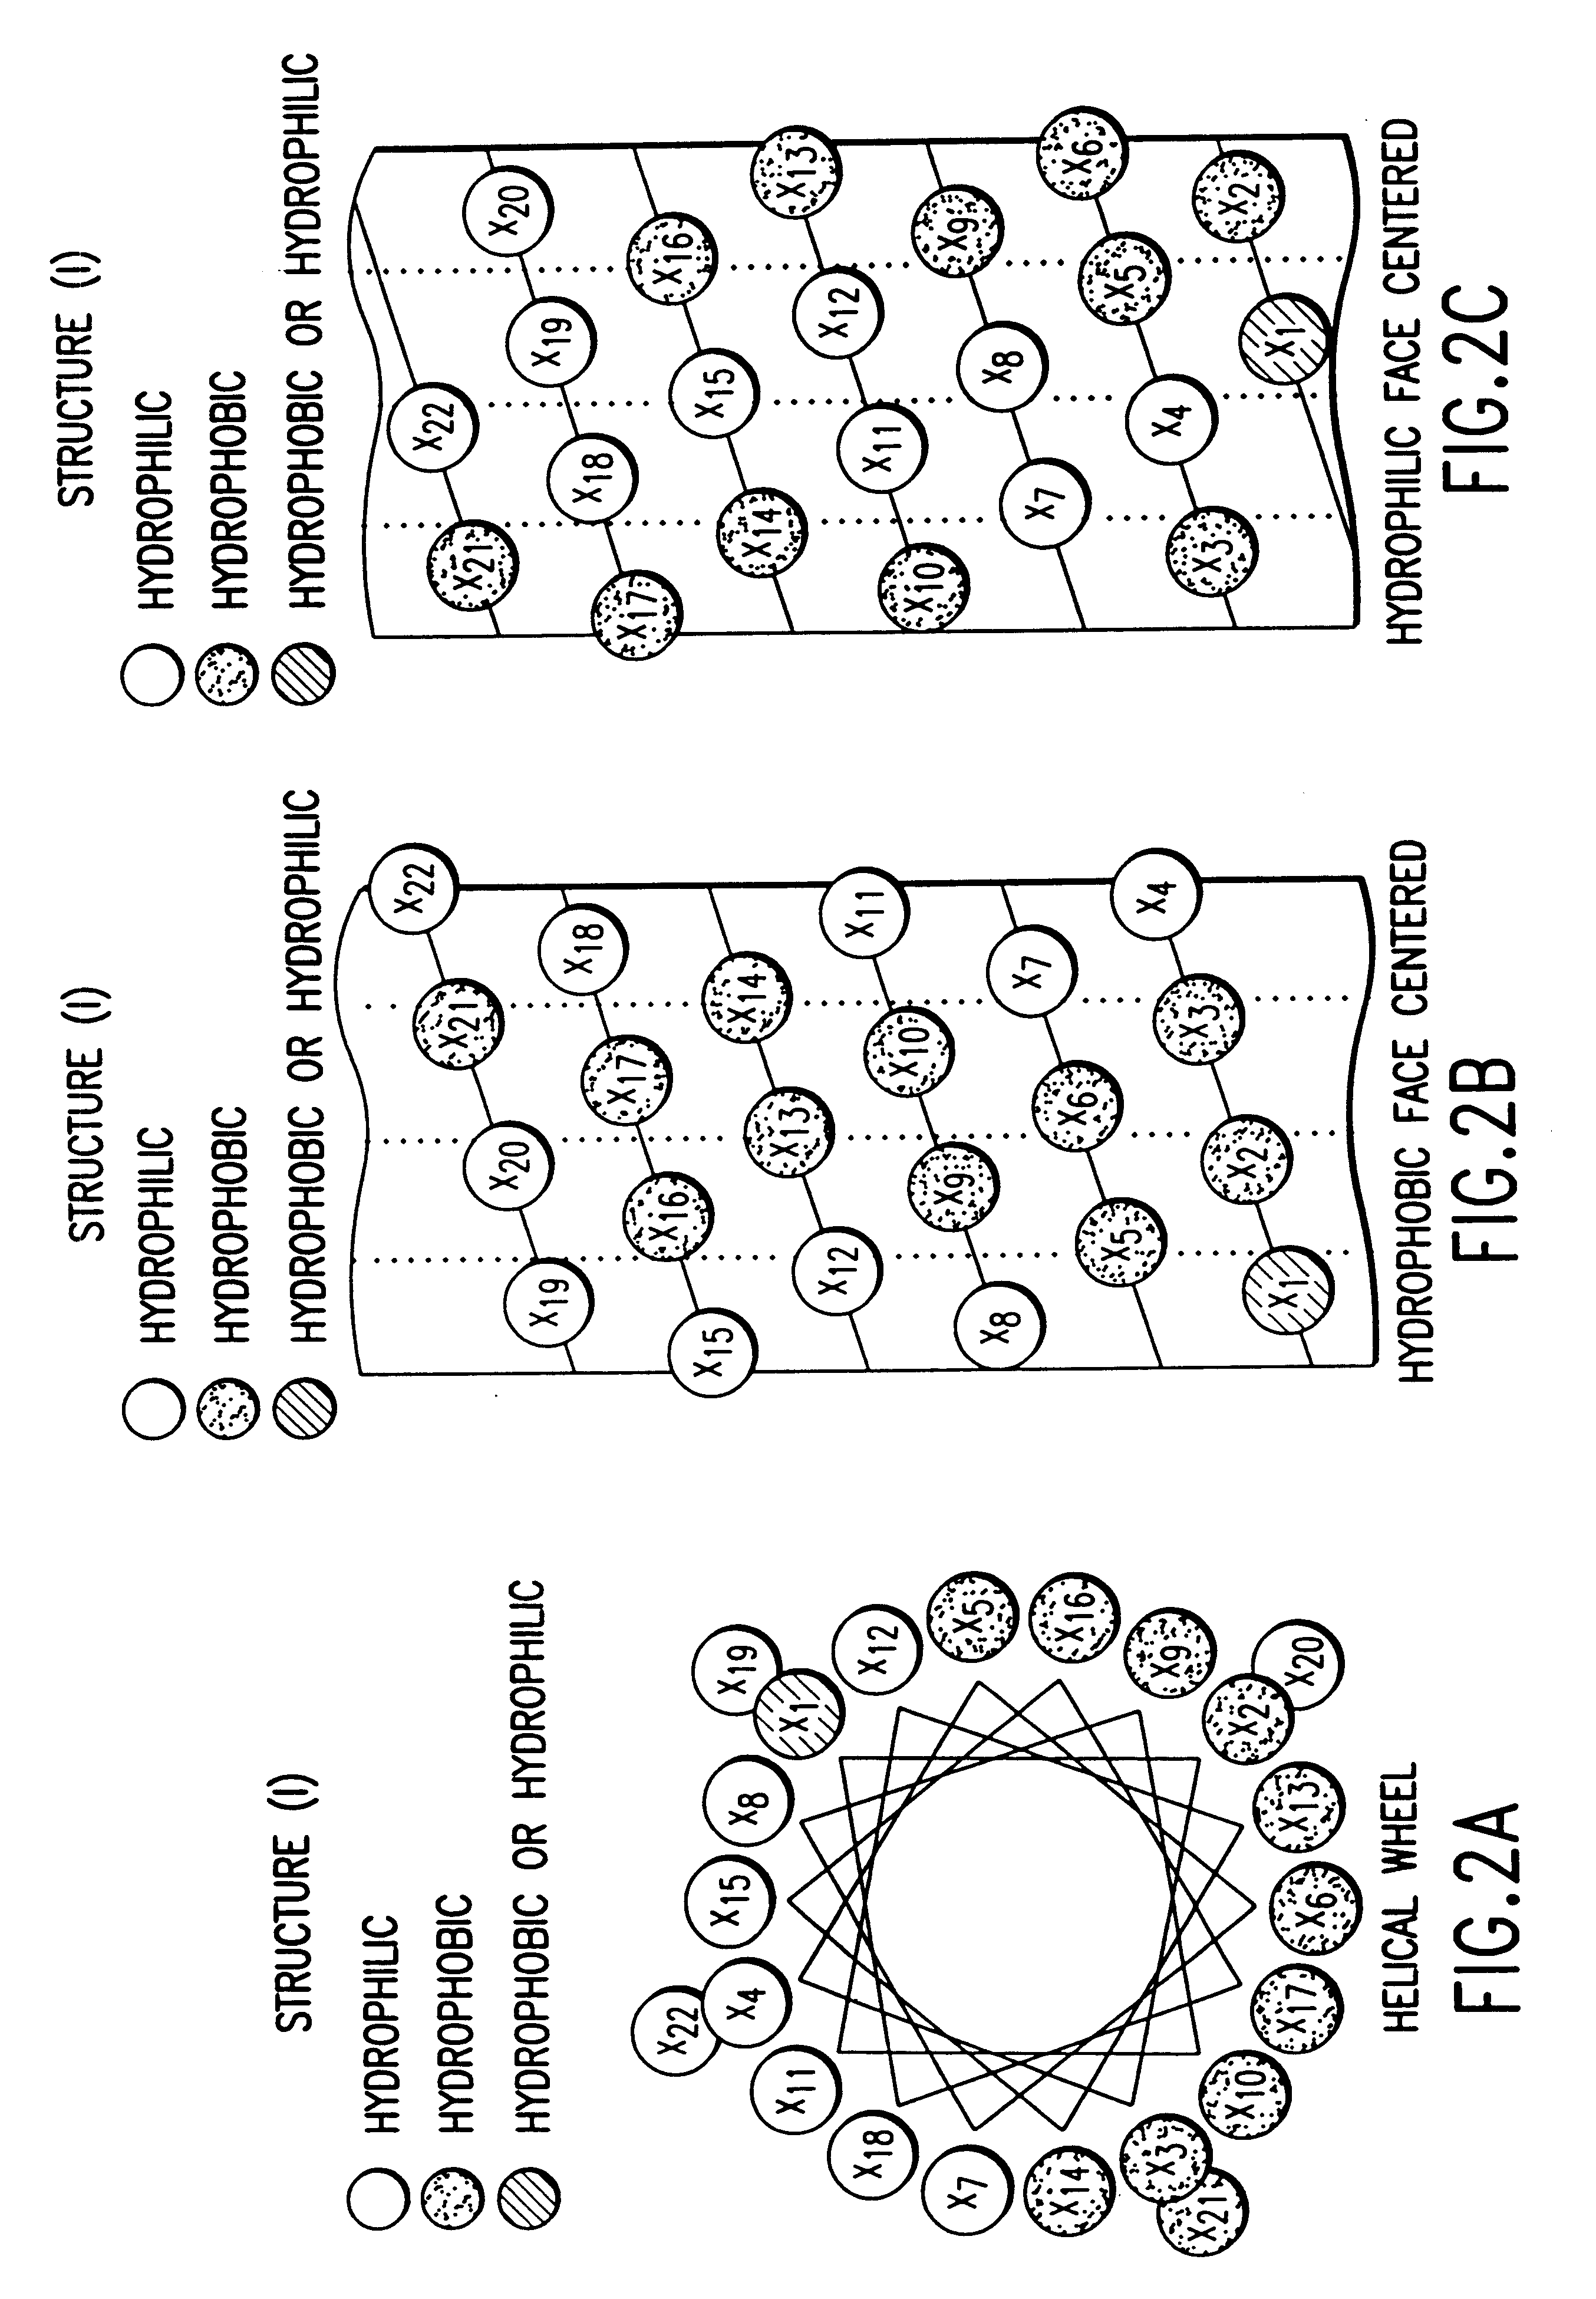 Lipid complexes of APO A-1 agonist compounds